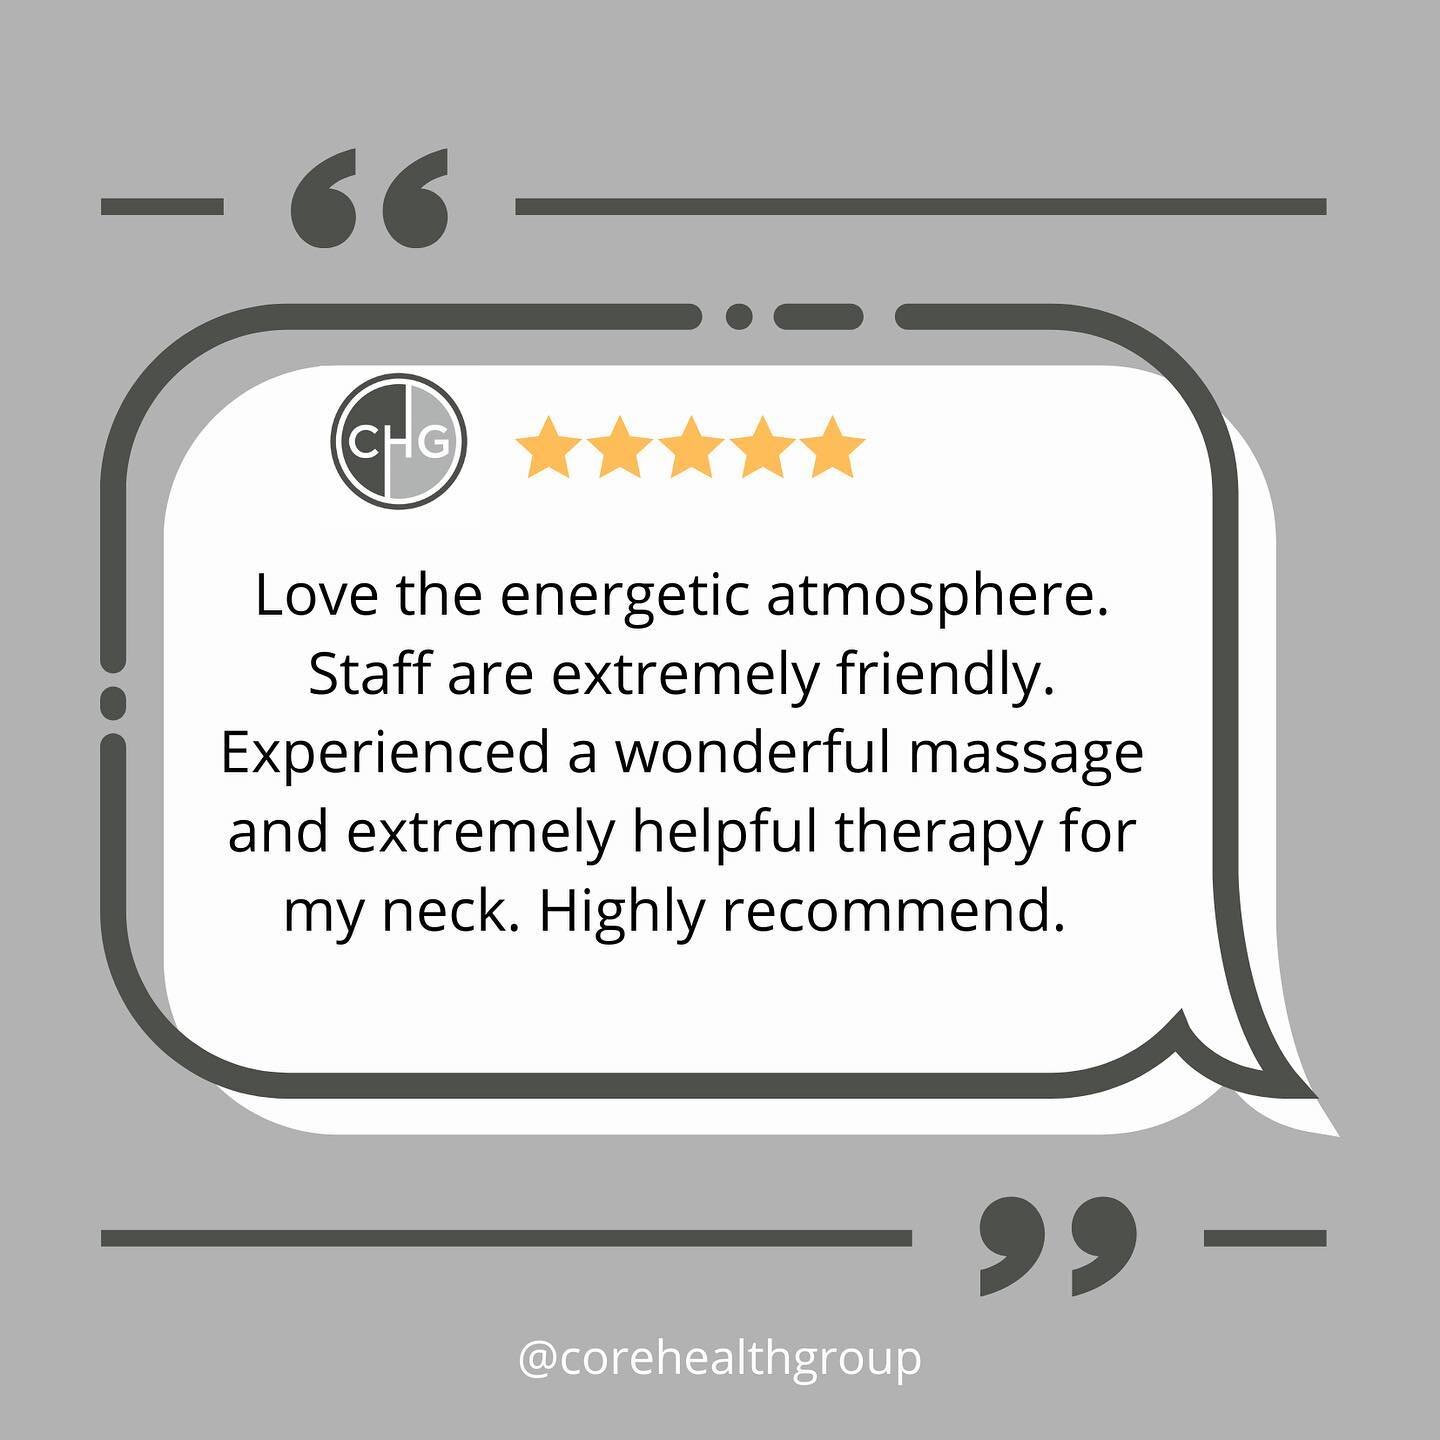 We love to hear about your CHG experiences 🤩

Visit the link in our bio to leave us a Google review today 📲